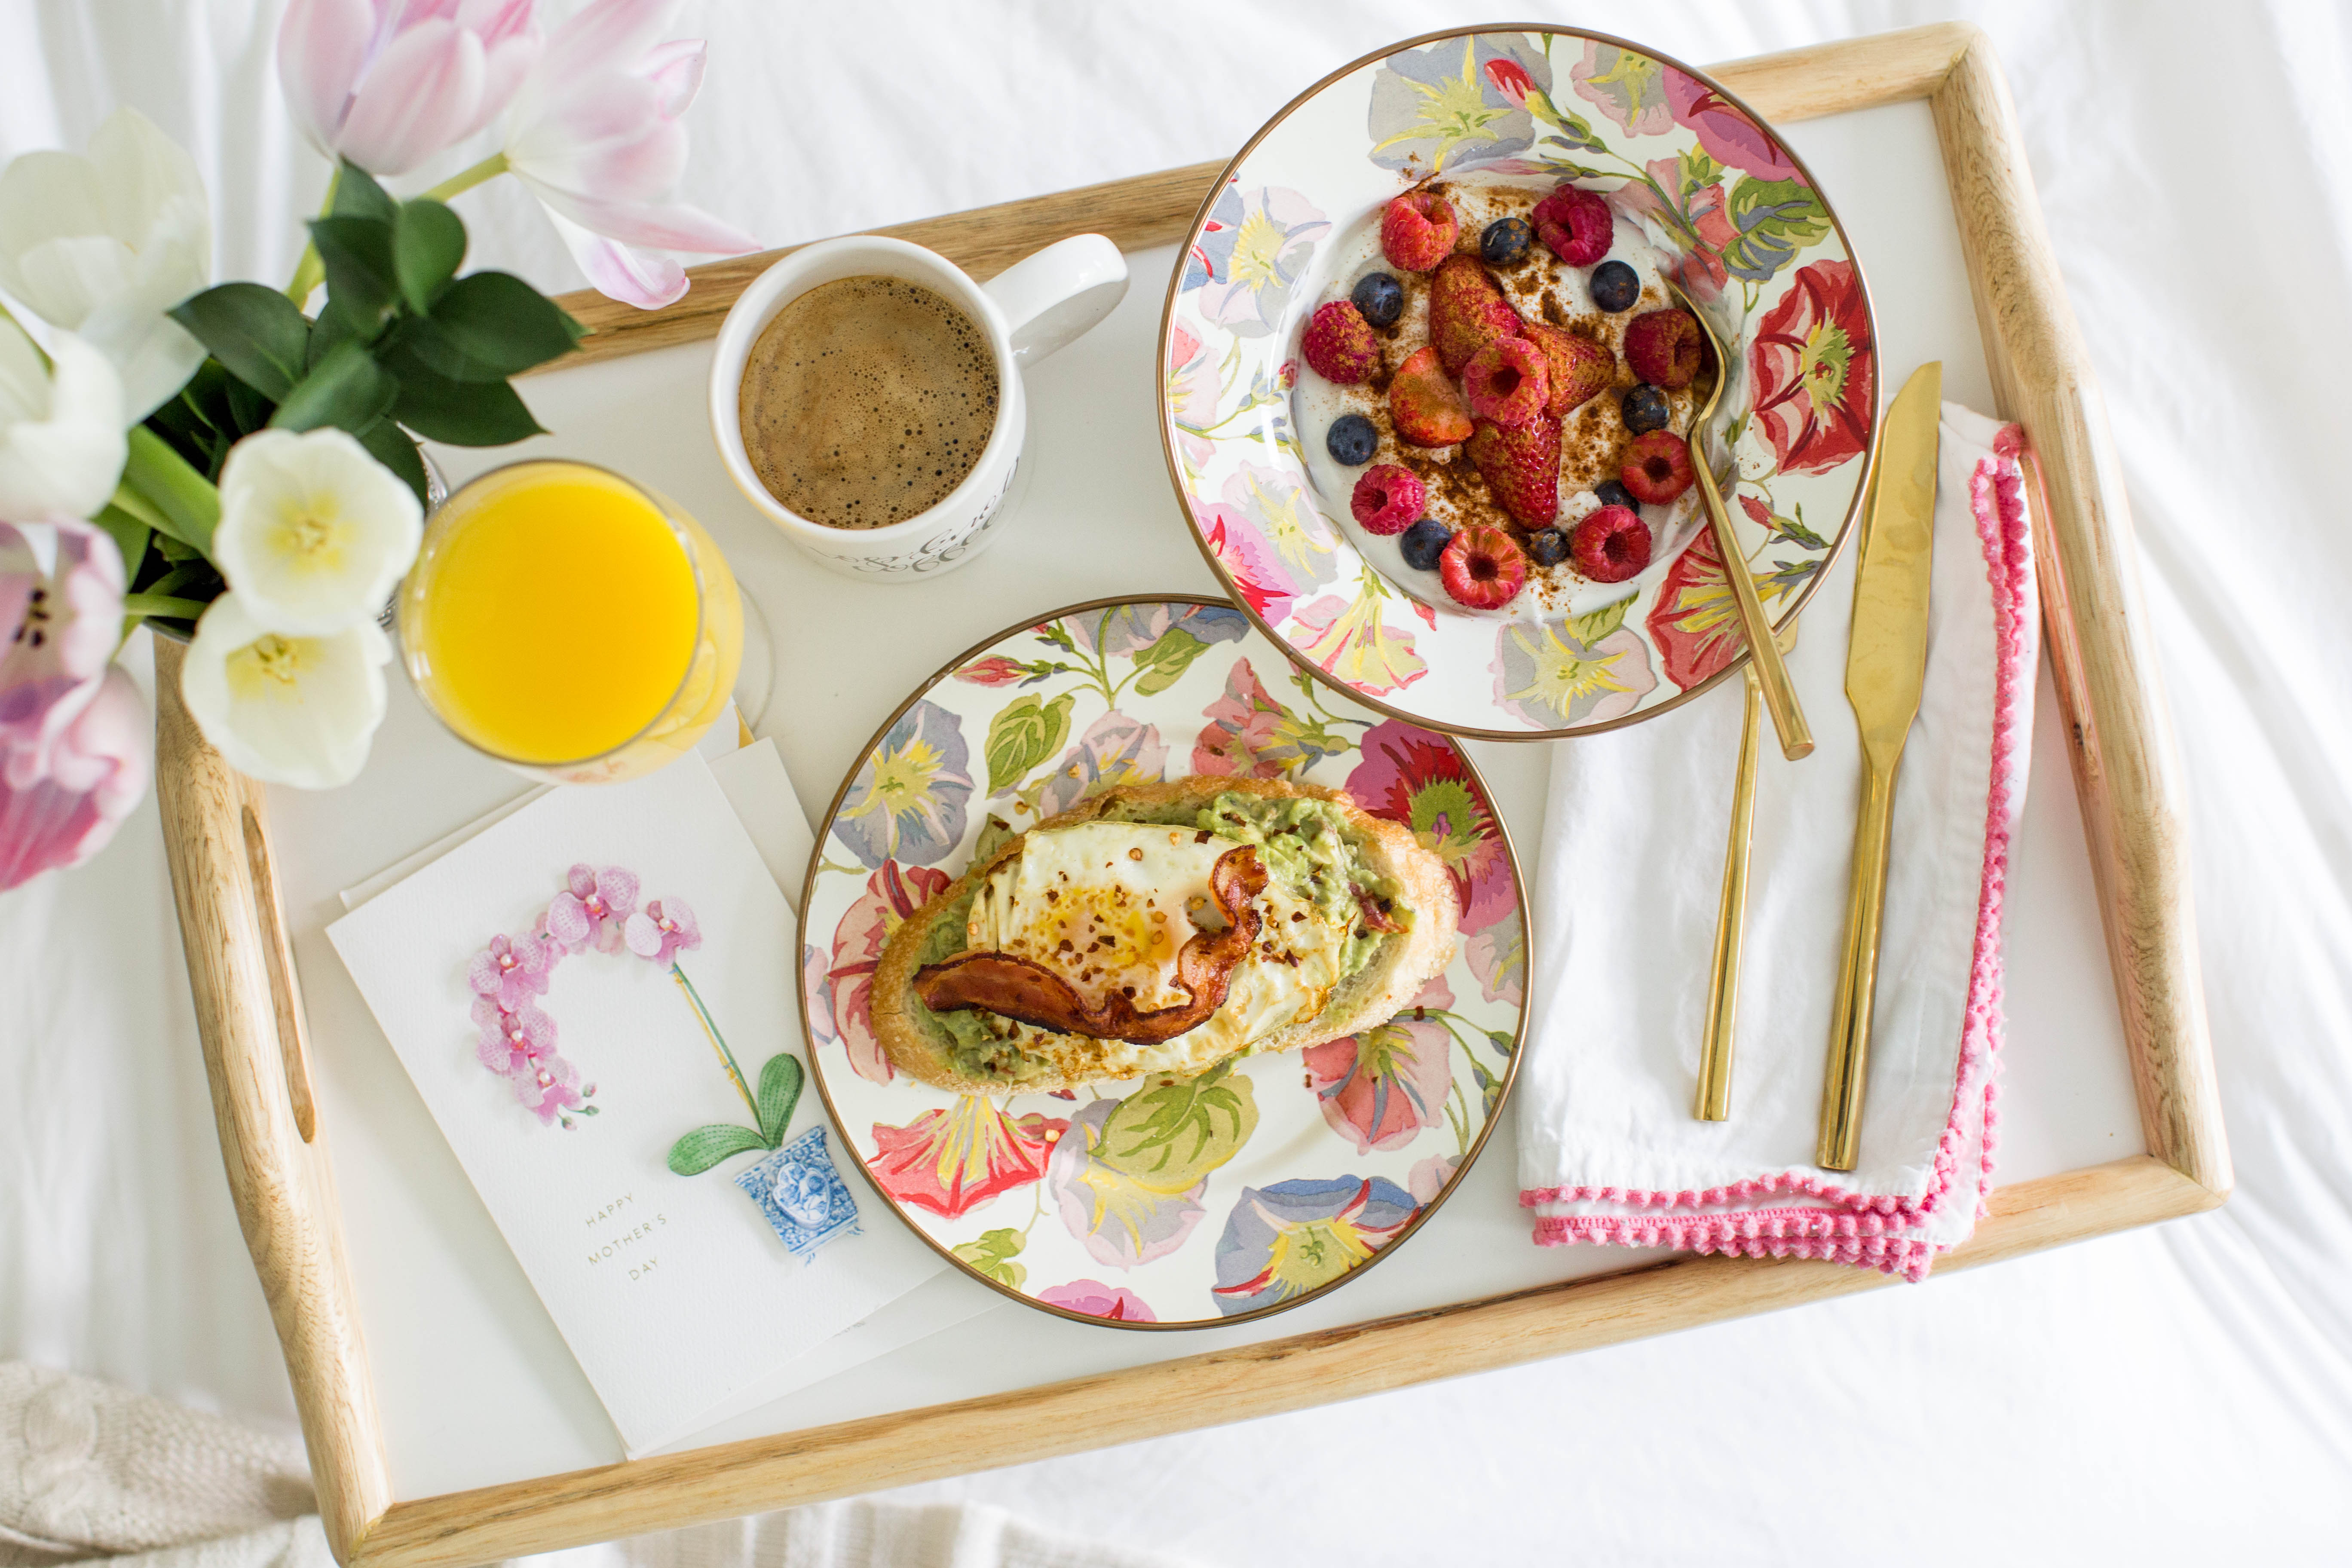 How To: Breakfast in Bed for Mom by NC lifestyle blogger Amy of Coffee Beans and Bobby Pins